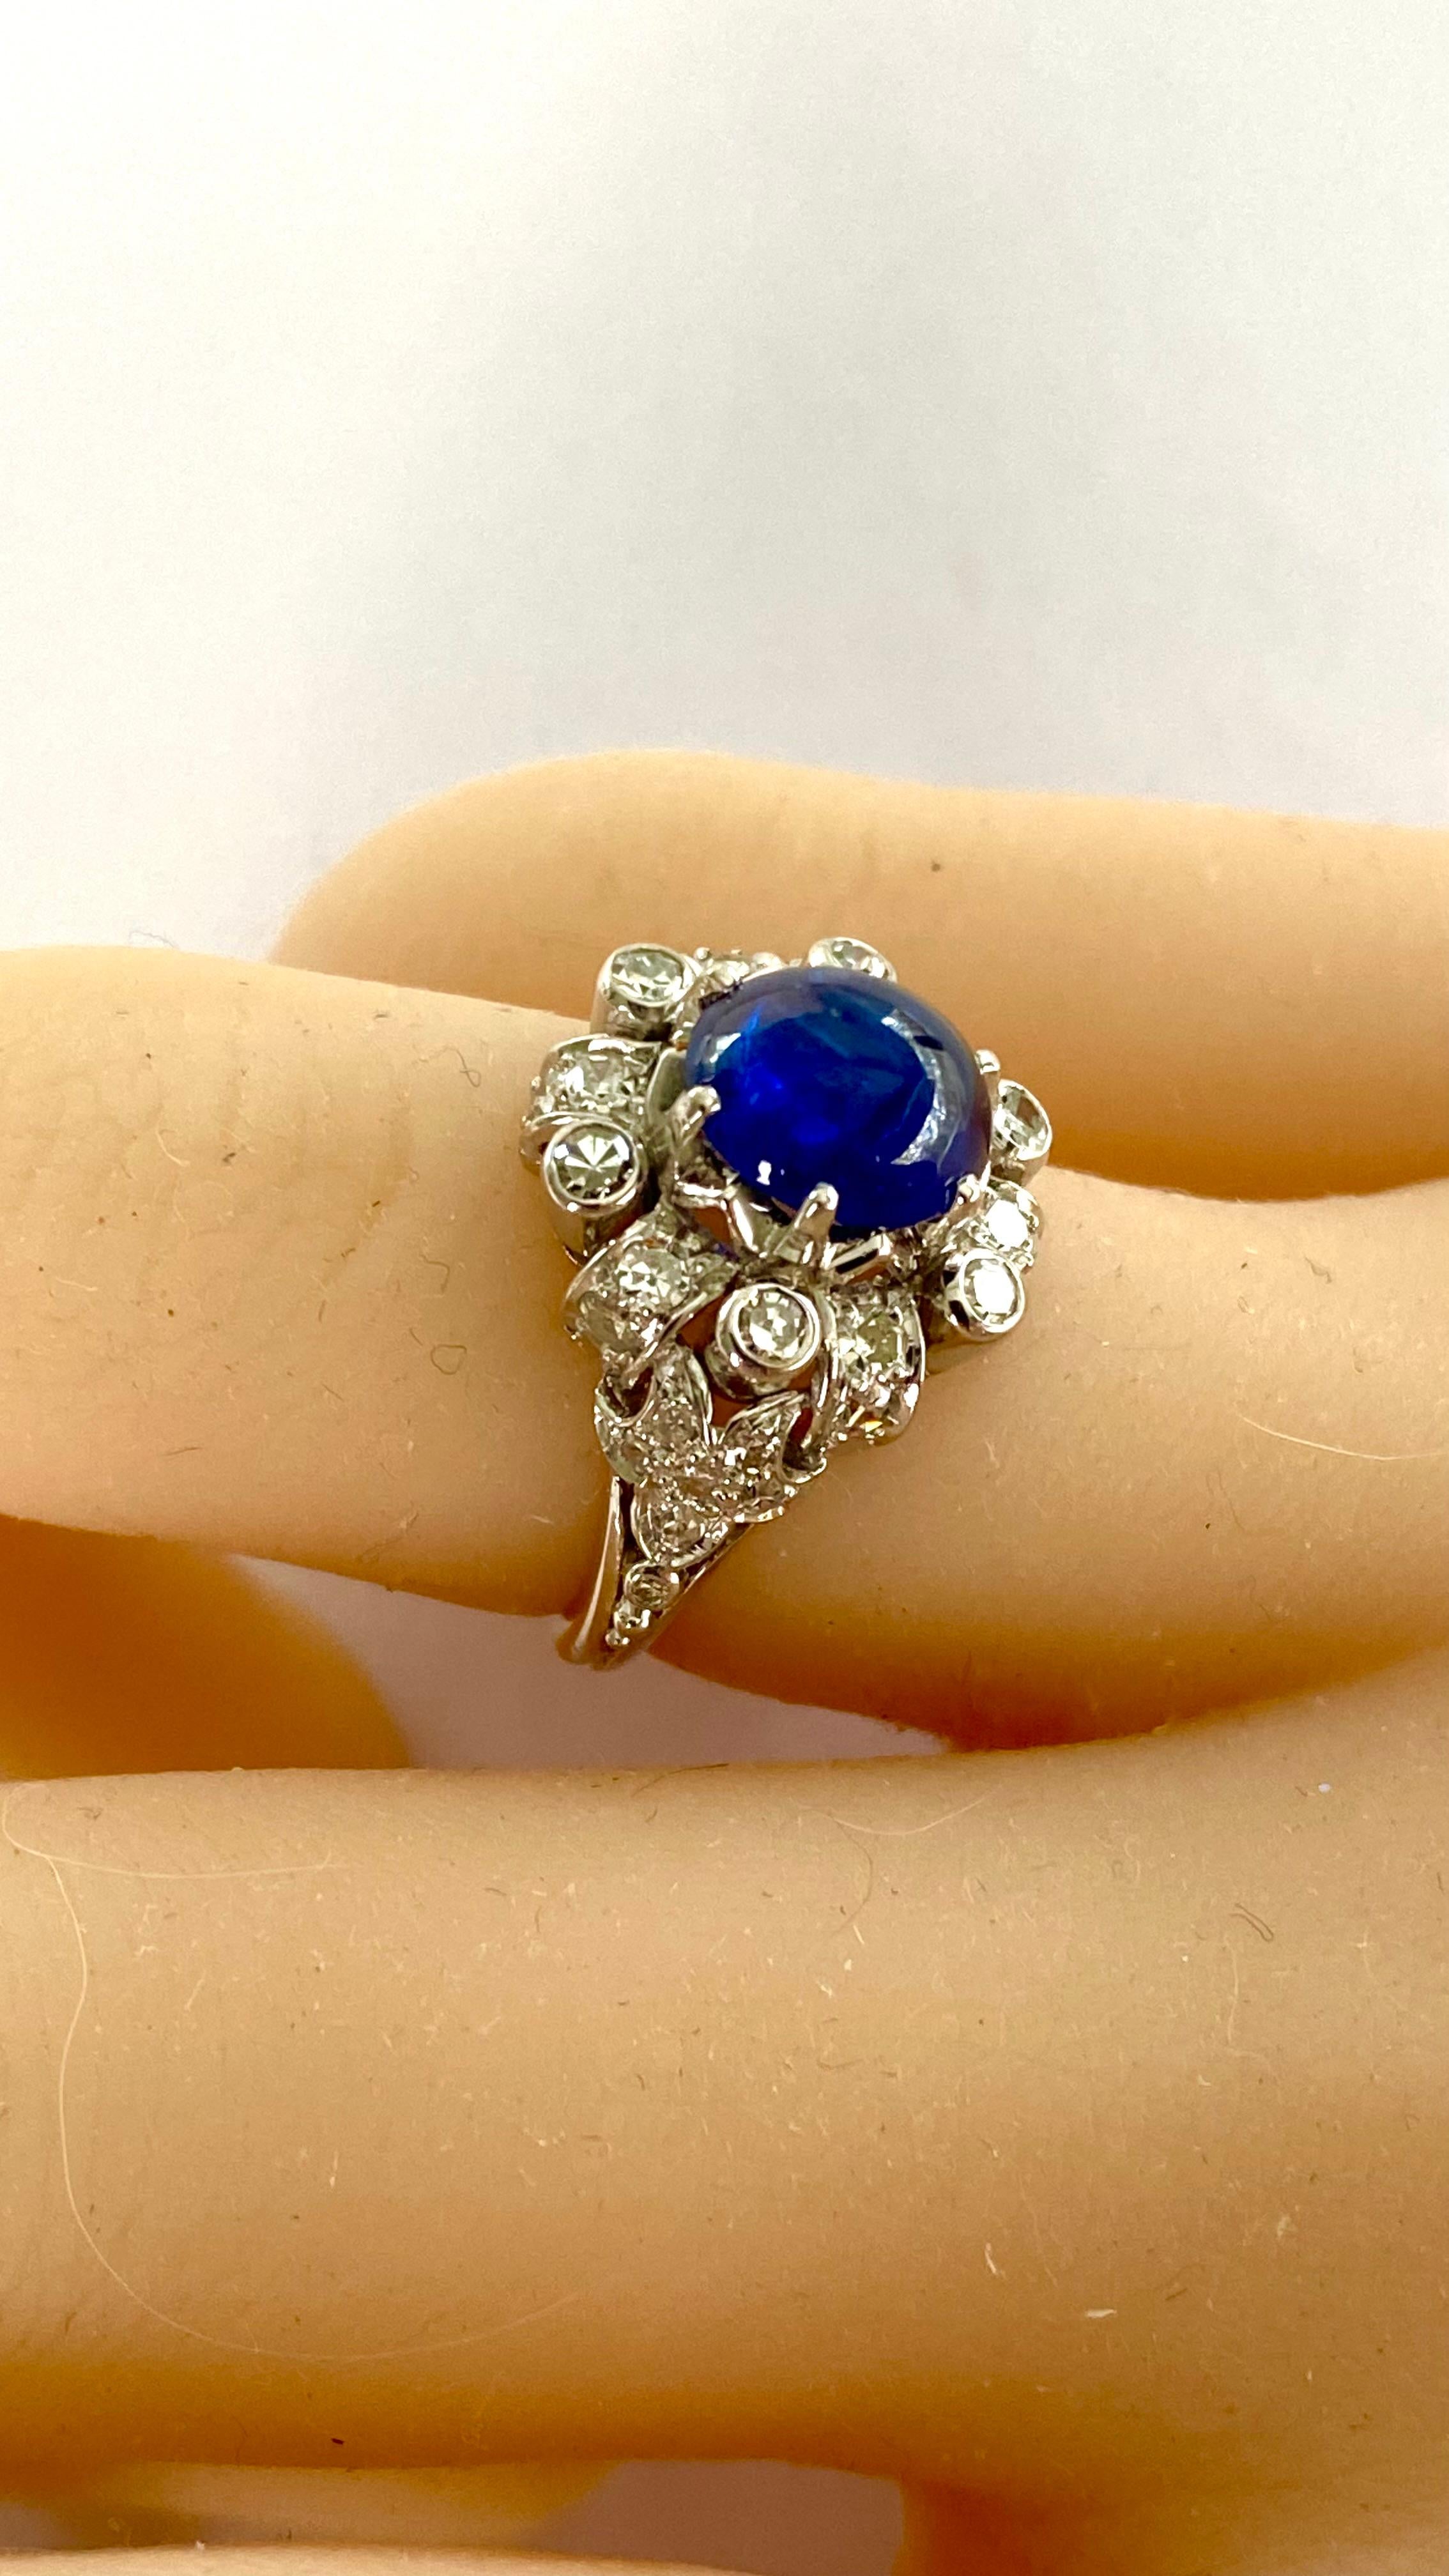 Platinum Mid Century Cocktail Ring Ceylon Cabochon Sapphire Diamonds 2.95 Carats In Good Condition For Sale In New York, NY